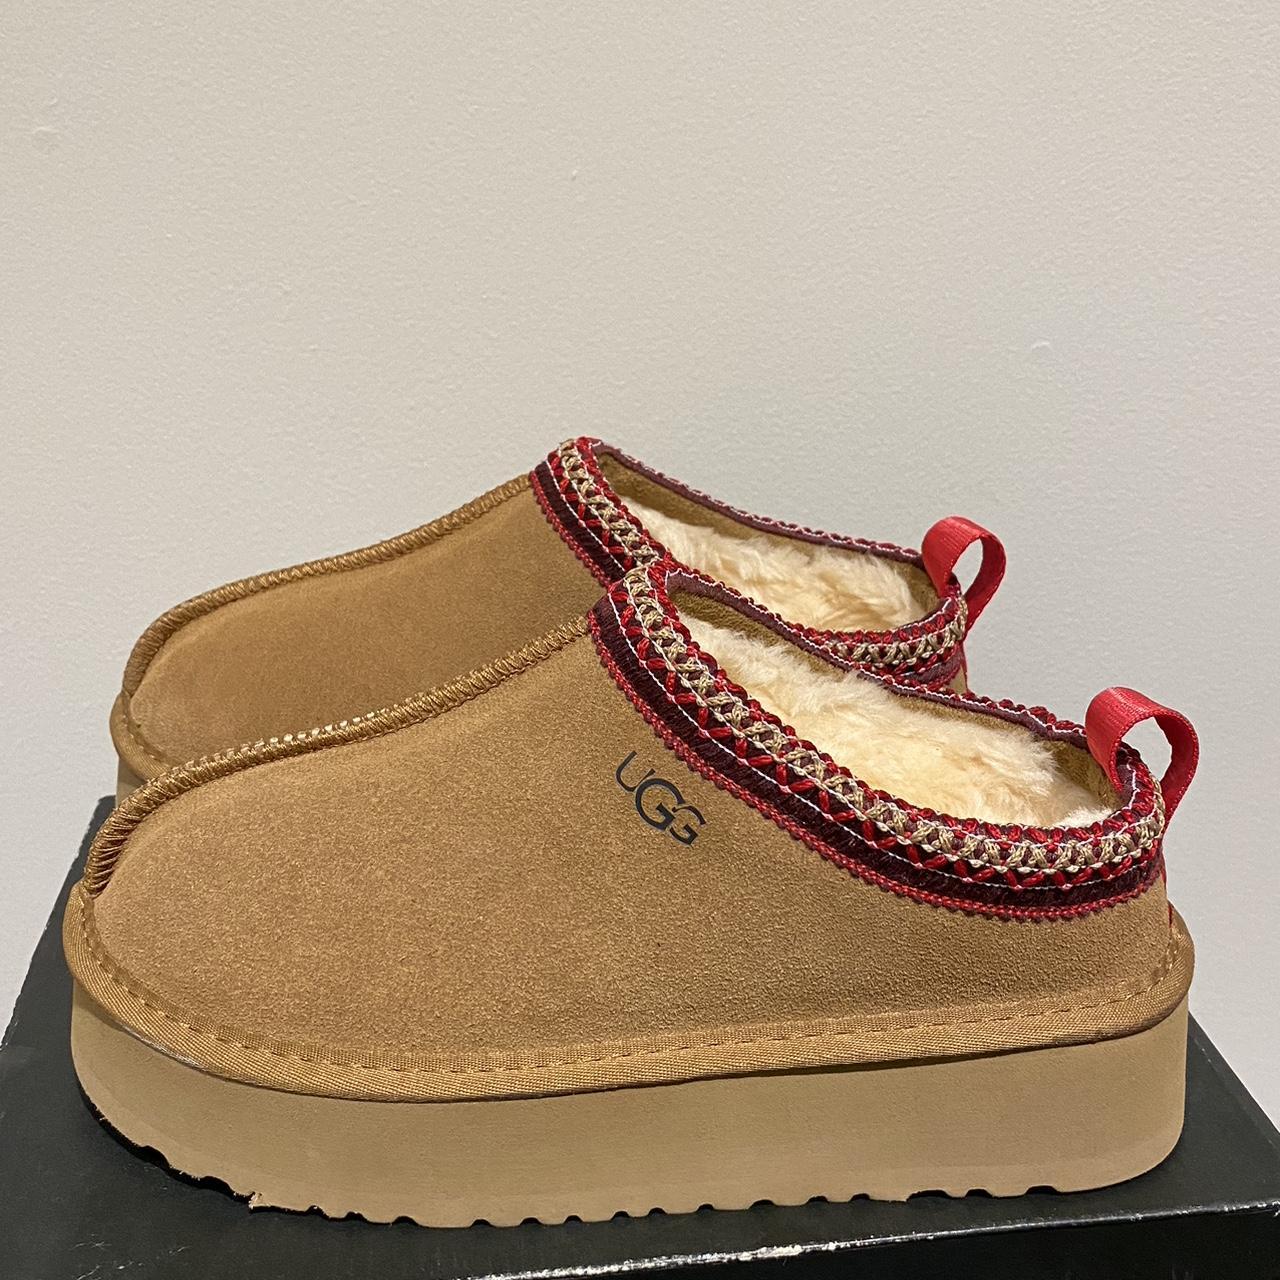 UGG Women's Brown and Red Slippers